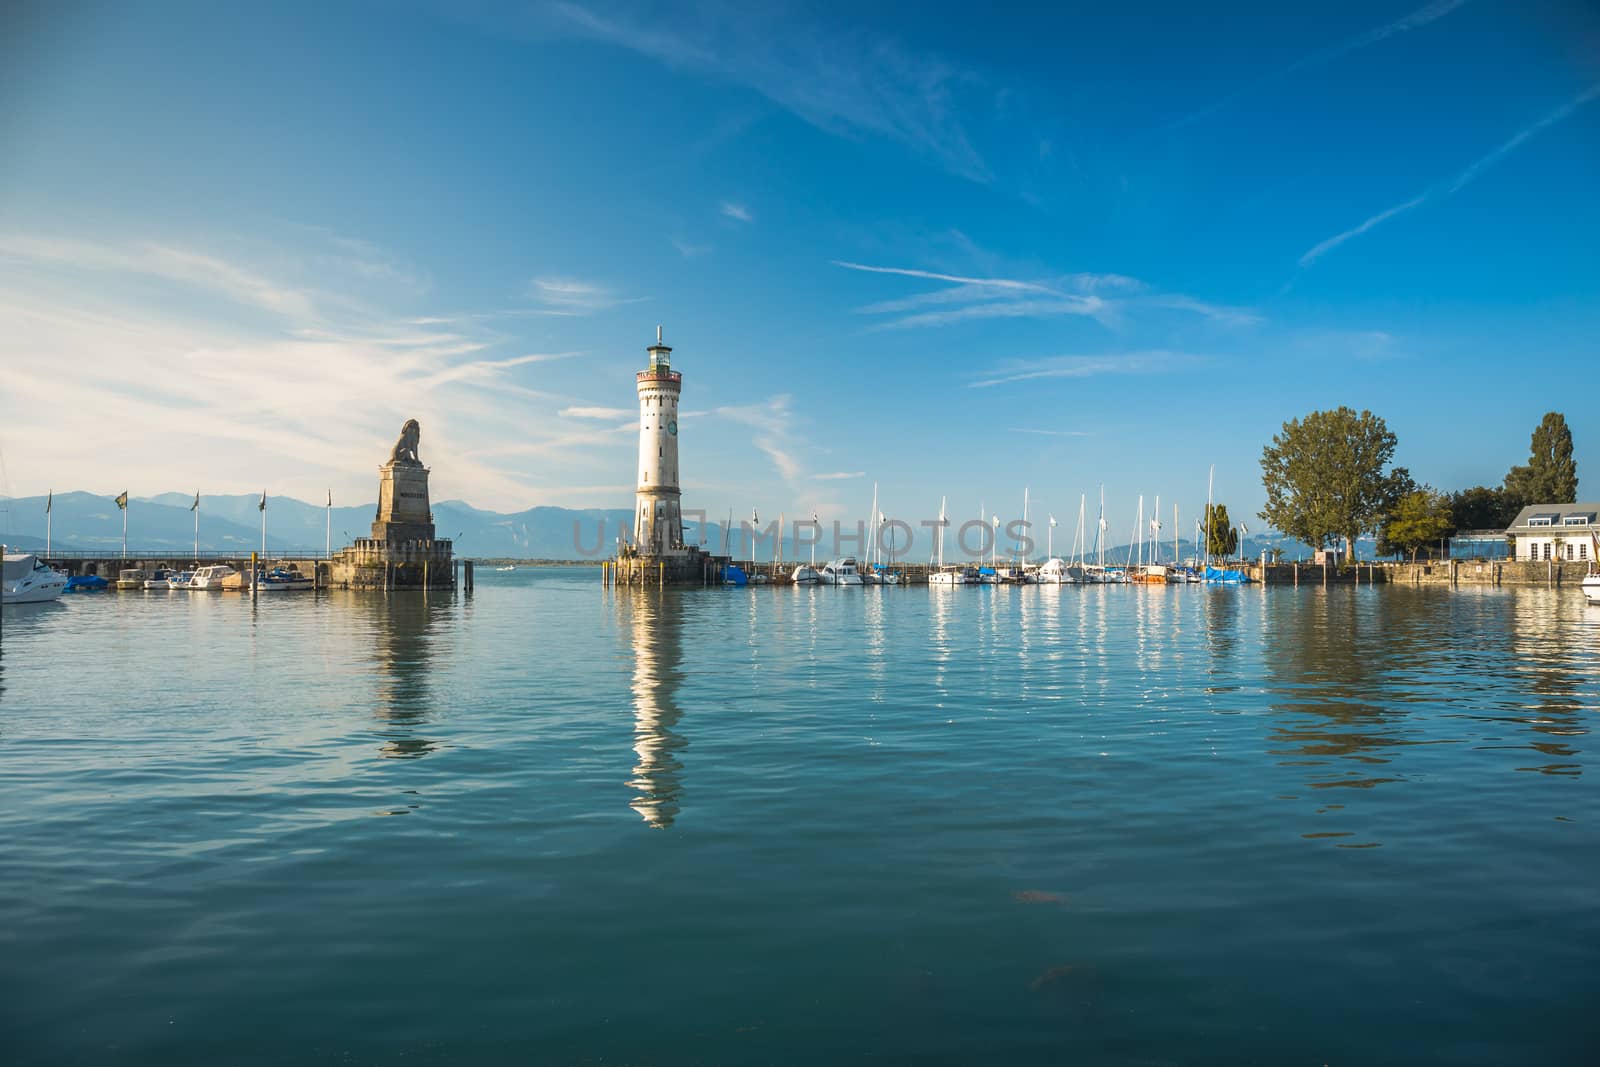 Harbour entrance of Lindau, Lake Constance - Bodensee - with the new lighthouse and the Bavarian Lion. The Lindau lighthouse is the southernmost lighthouse in Germany, in Lindau on Lake Constance